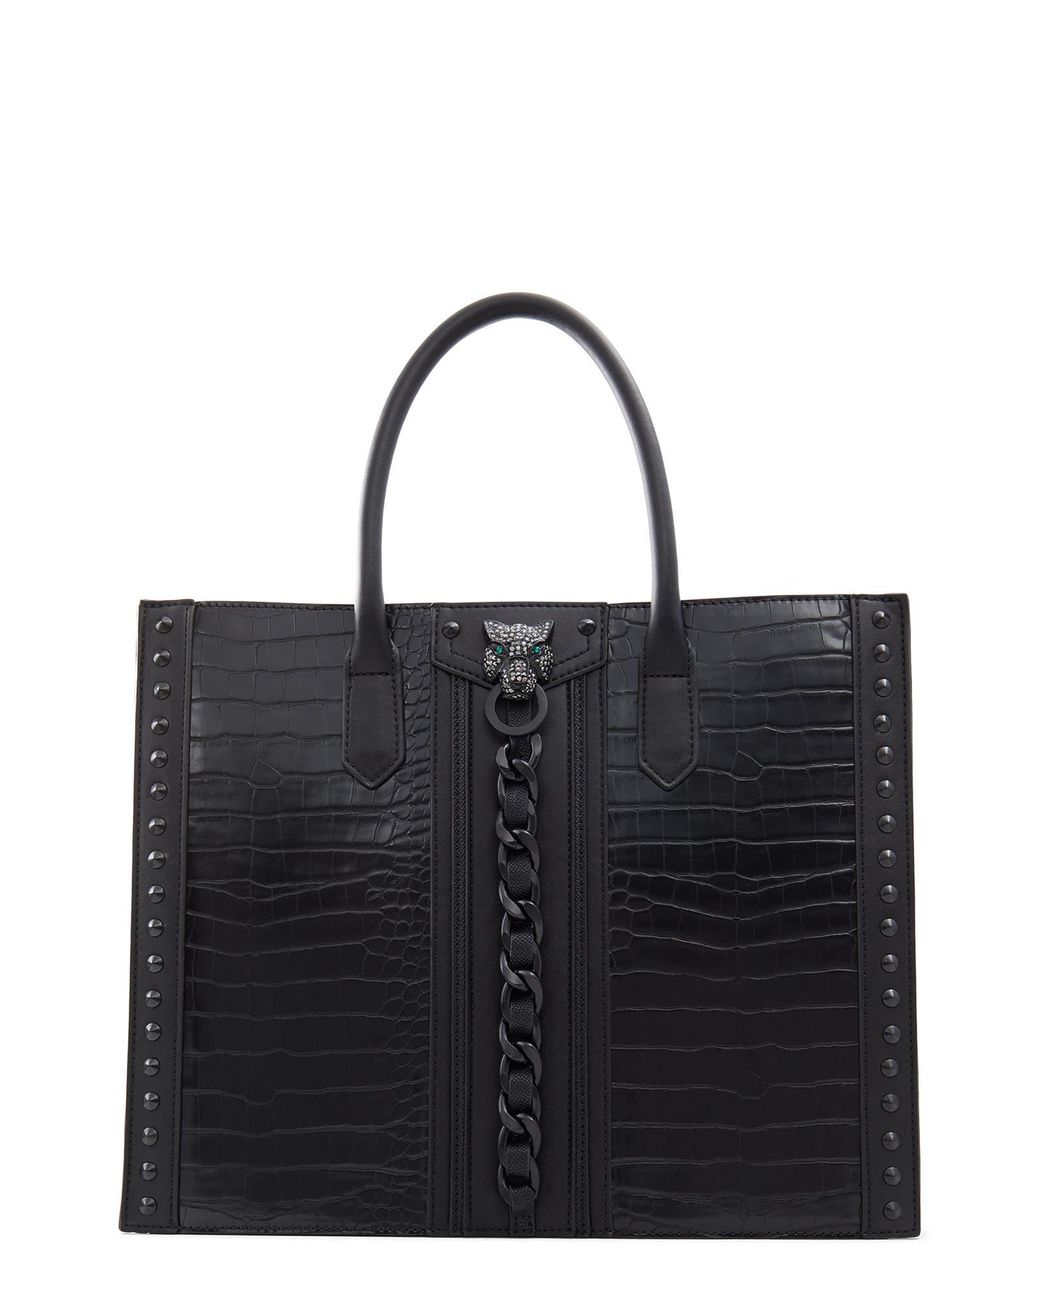 ALDO Aboma Structured Faux Leather Tote in Black | Lyst